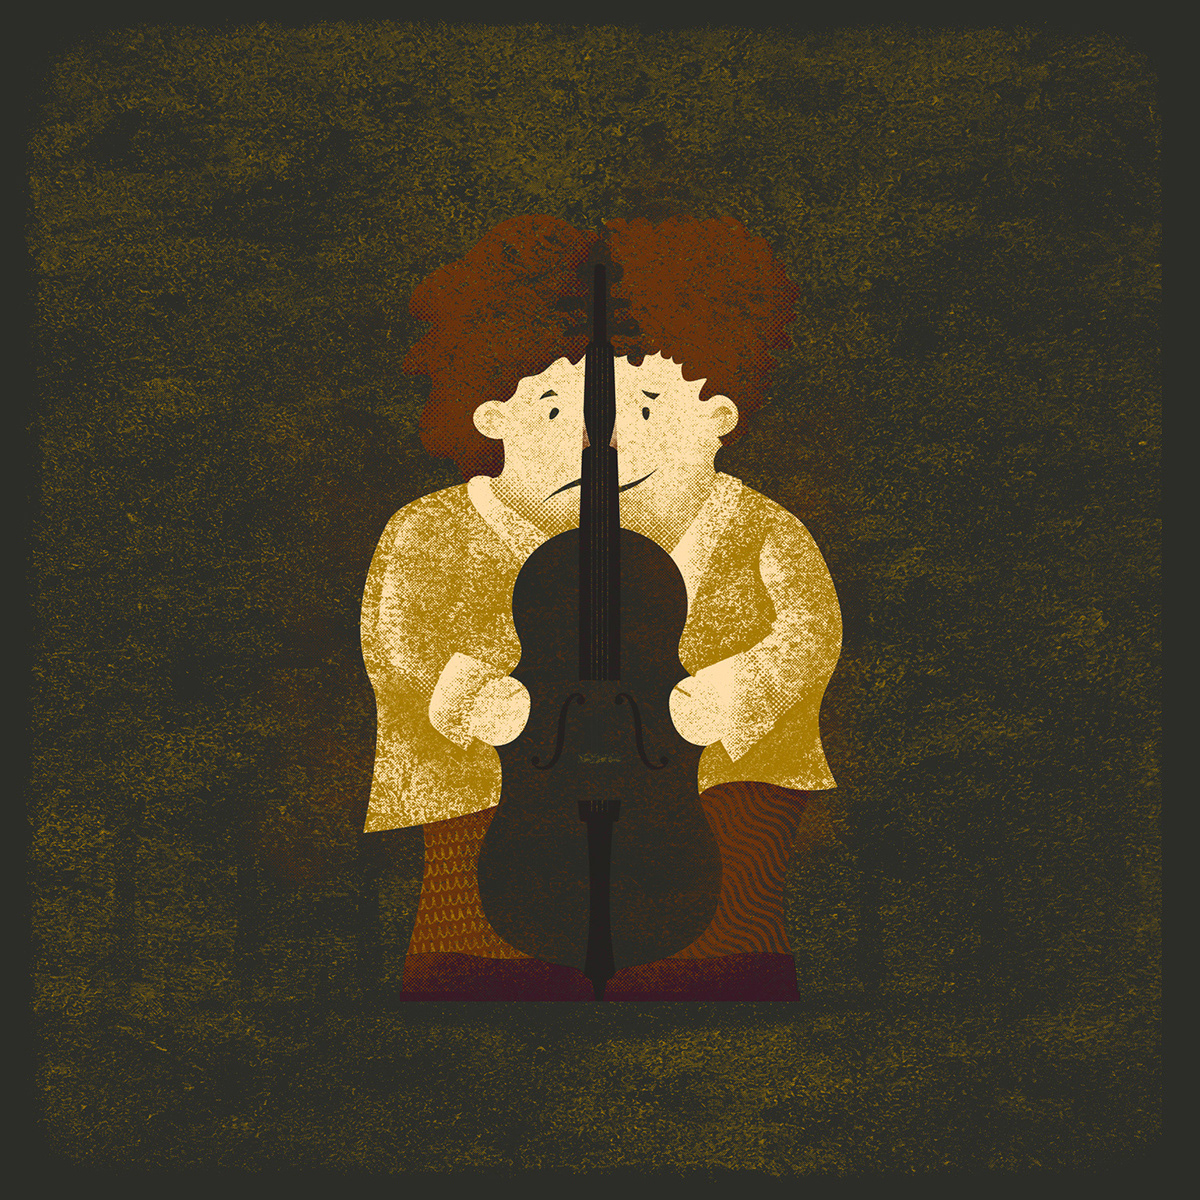 Occupational conversation illustration series featuring cellists